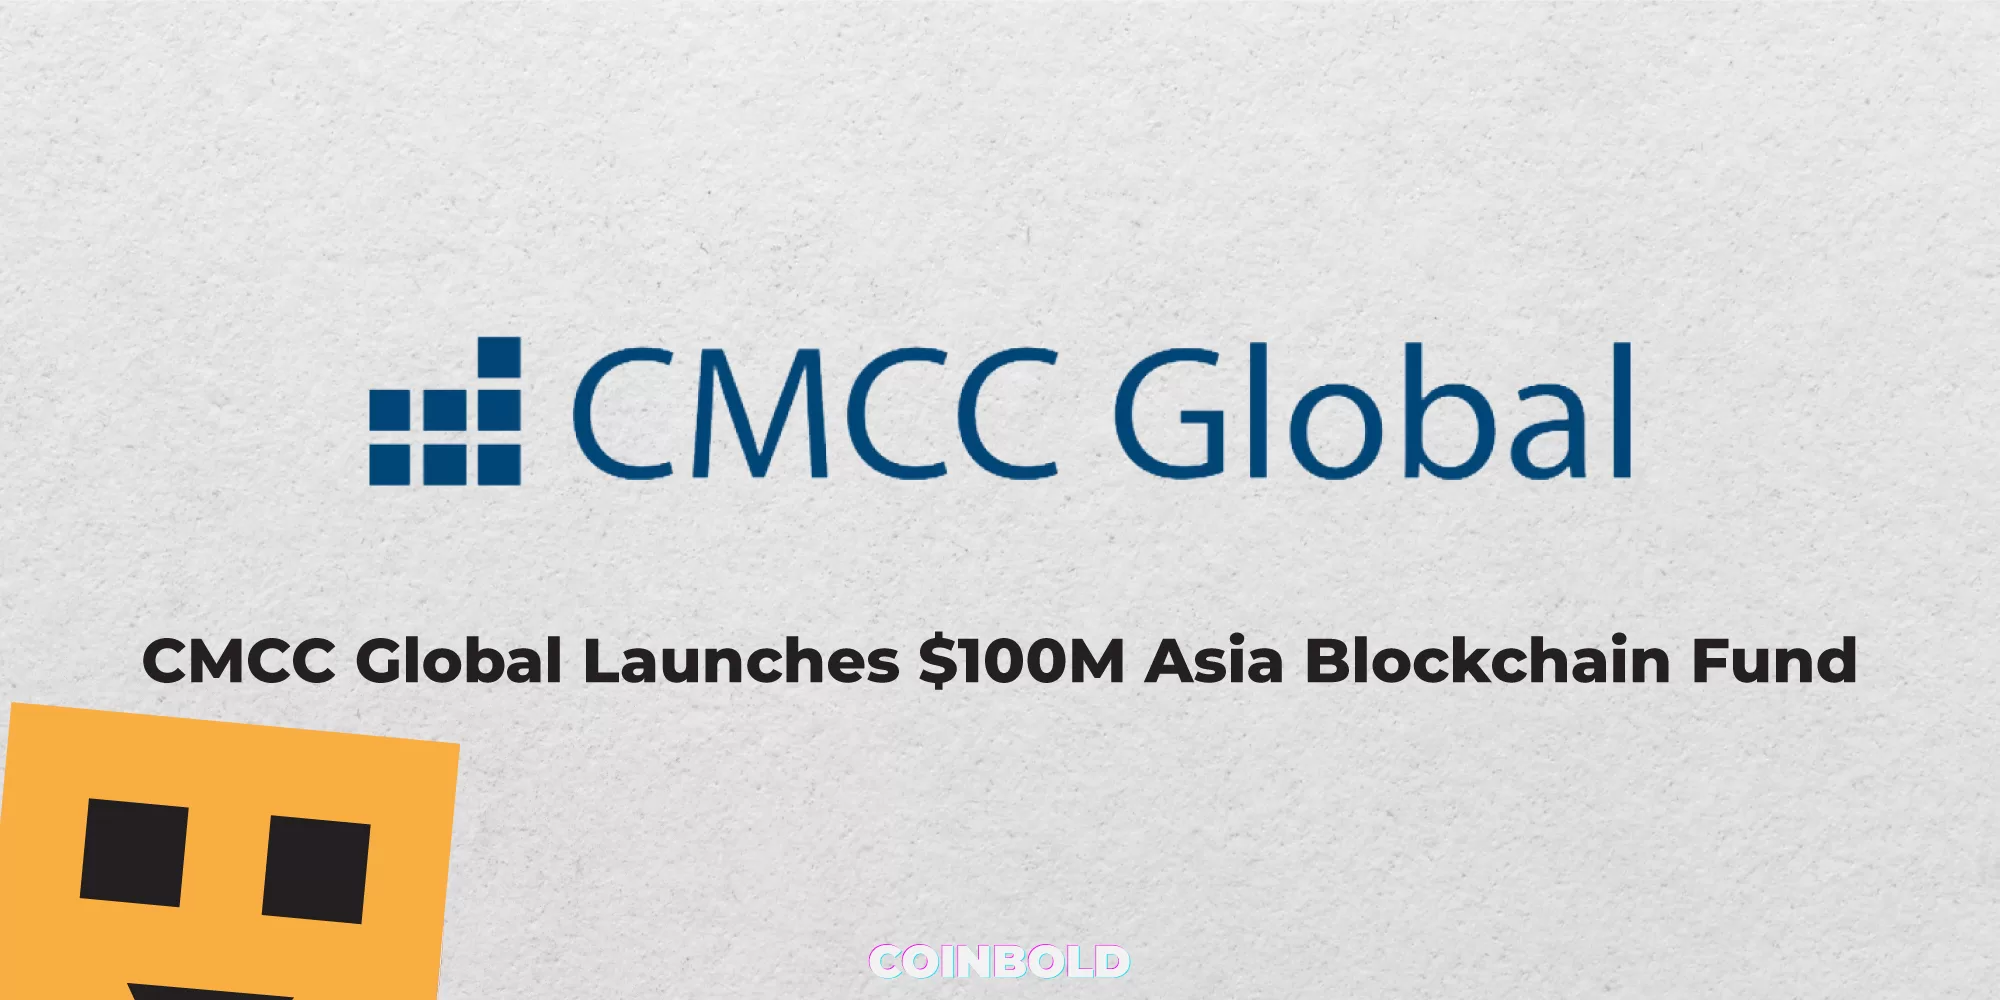 CMCC Global Launches $100M Asia Blockchain Fund